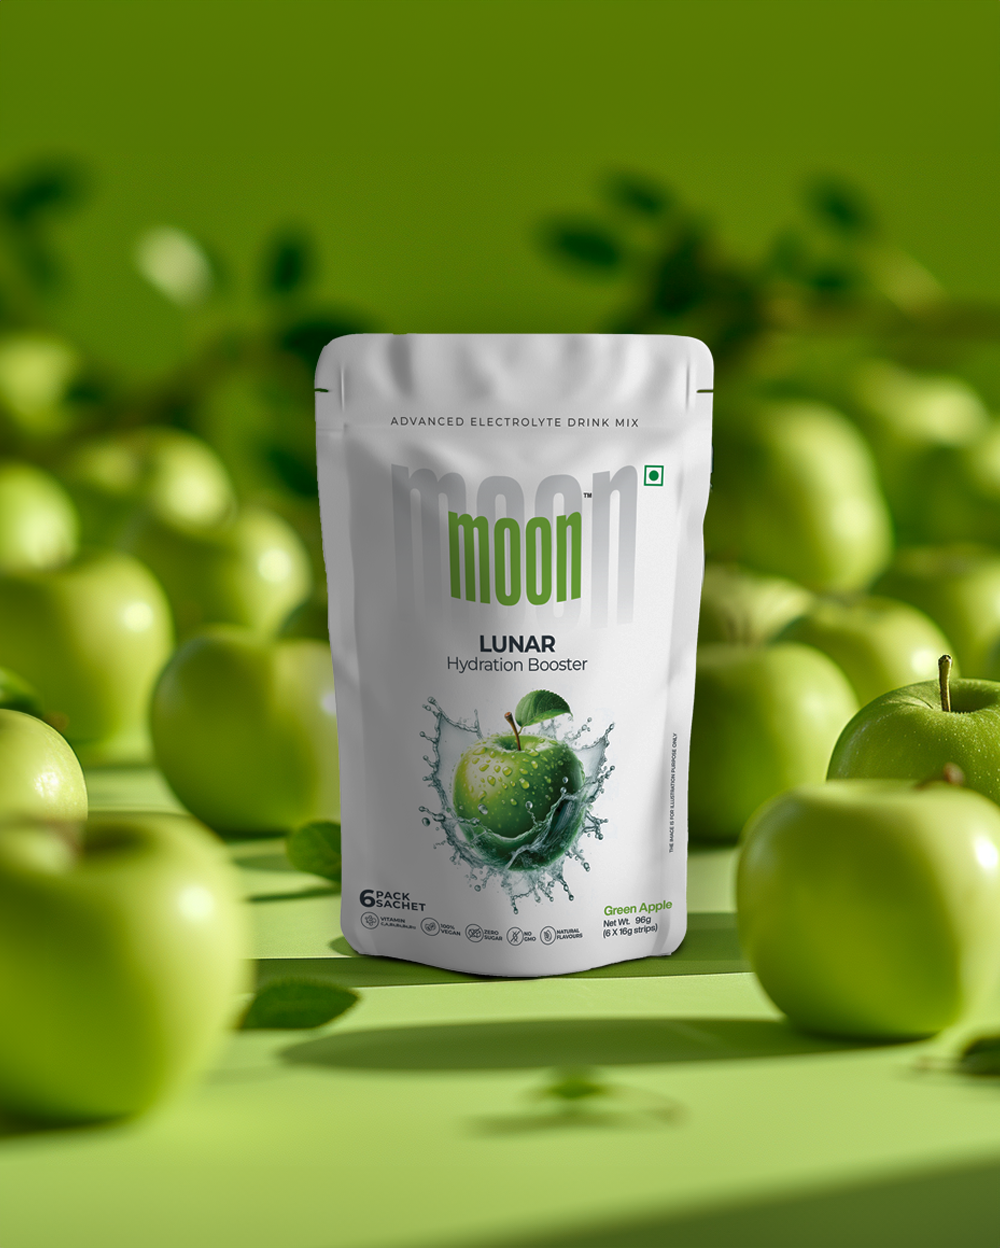 A white package with Moon Green Apple Lunar Hydration Booster in the background.